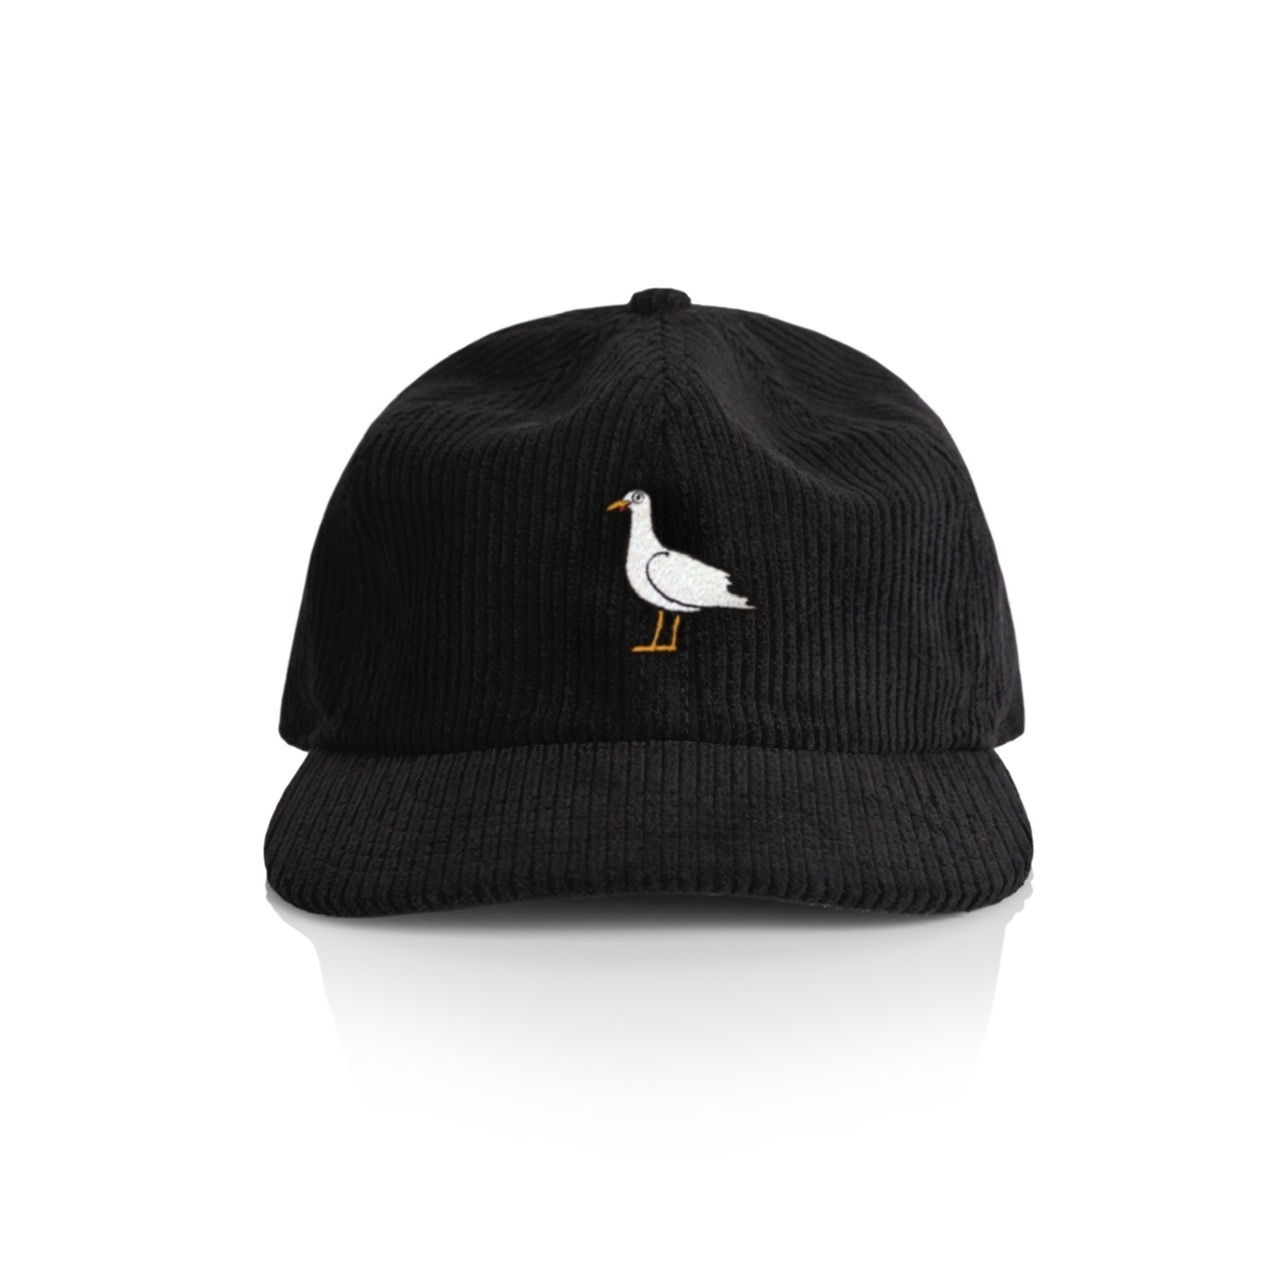 Seagull-hat-corduroy-camp-hat-low-profile-cord